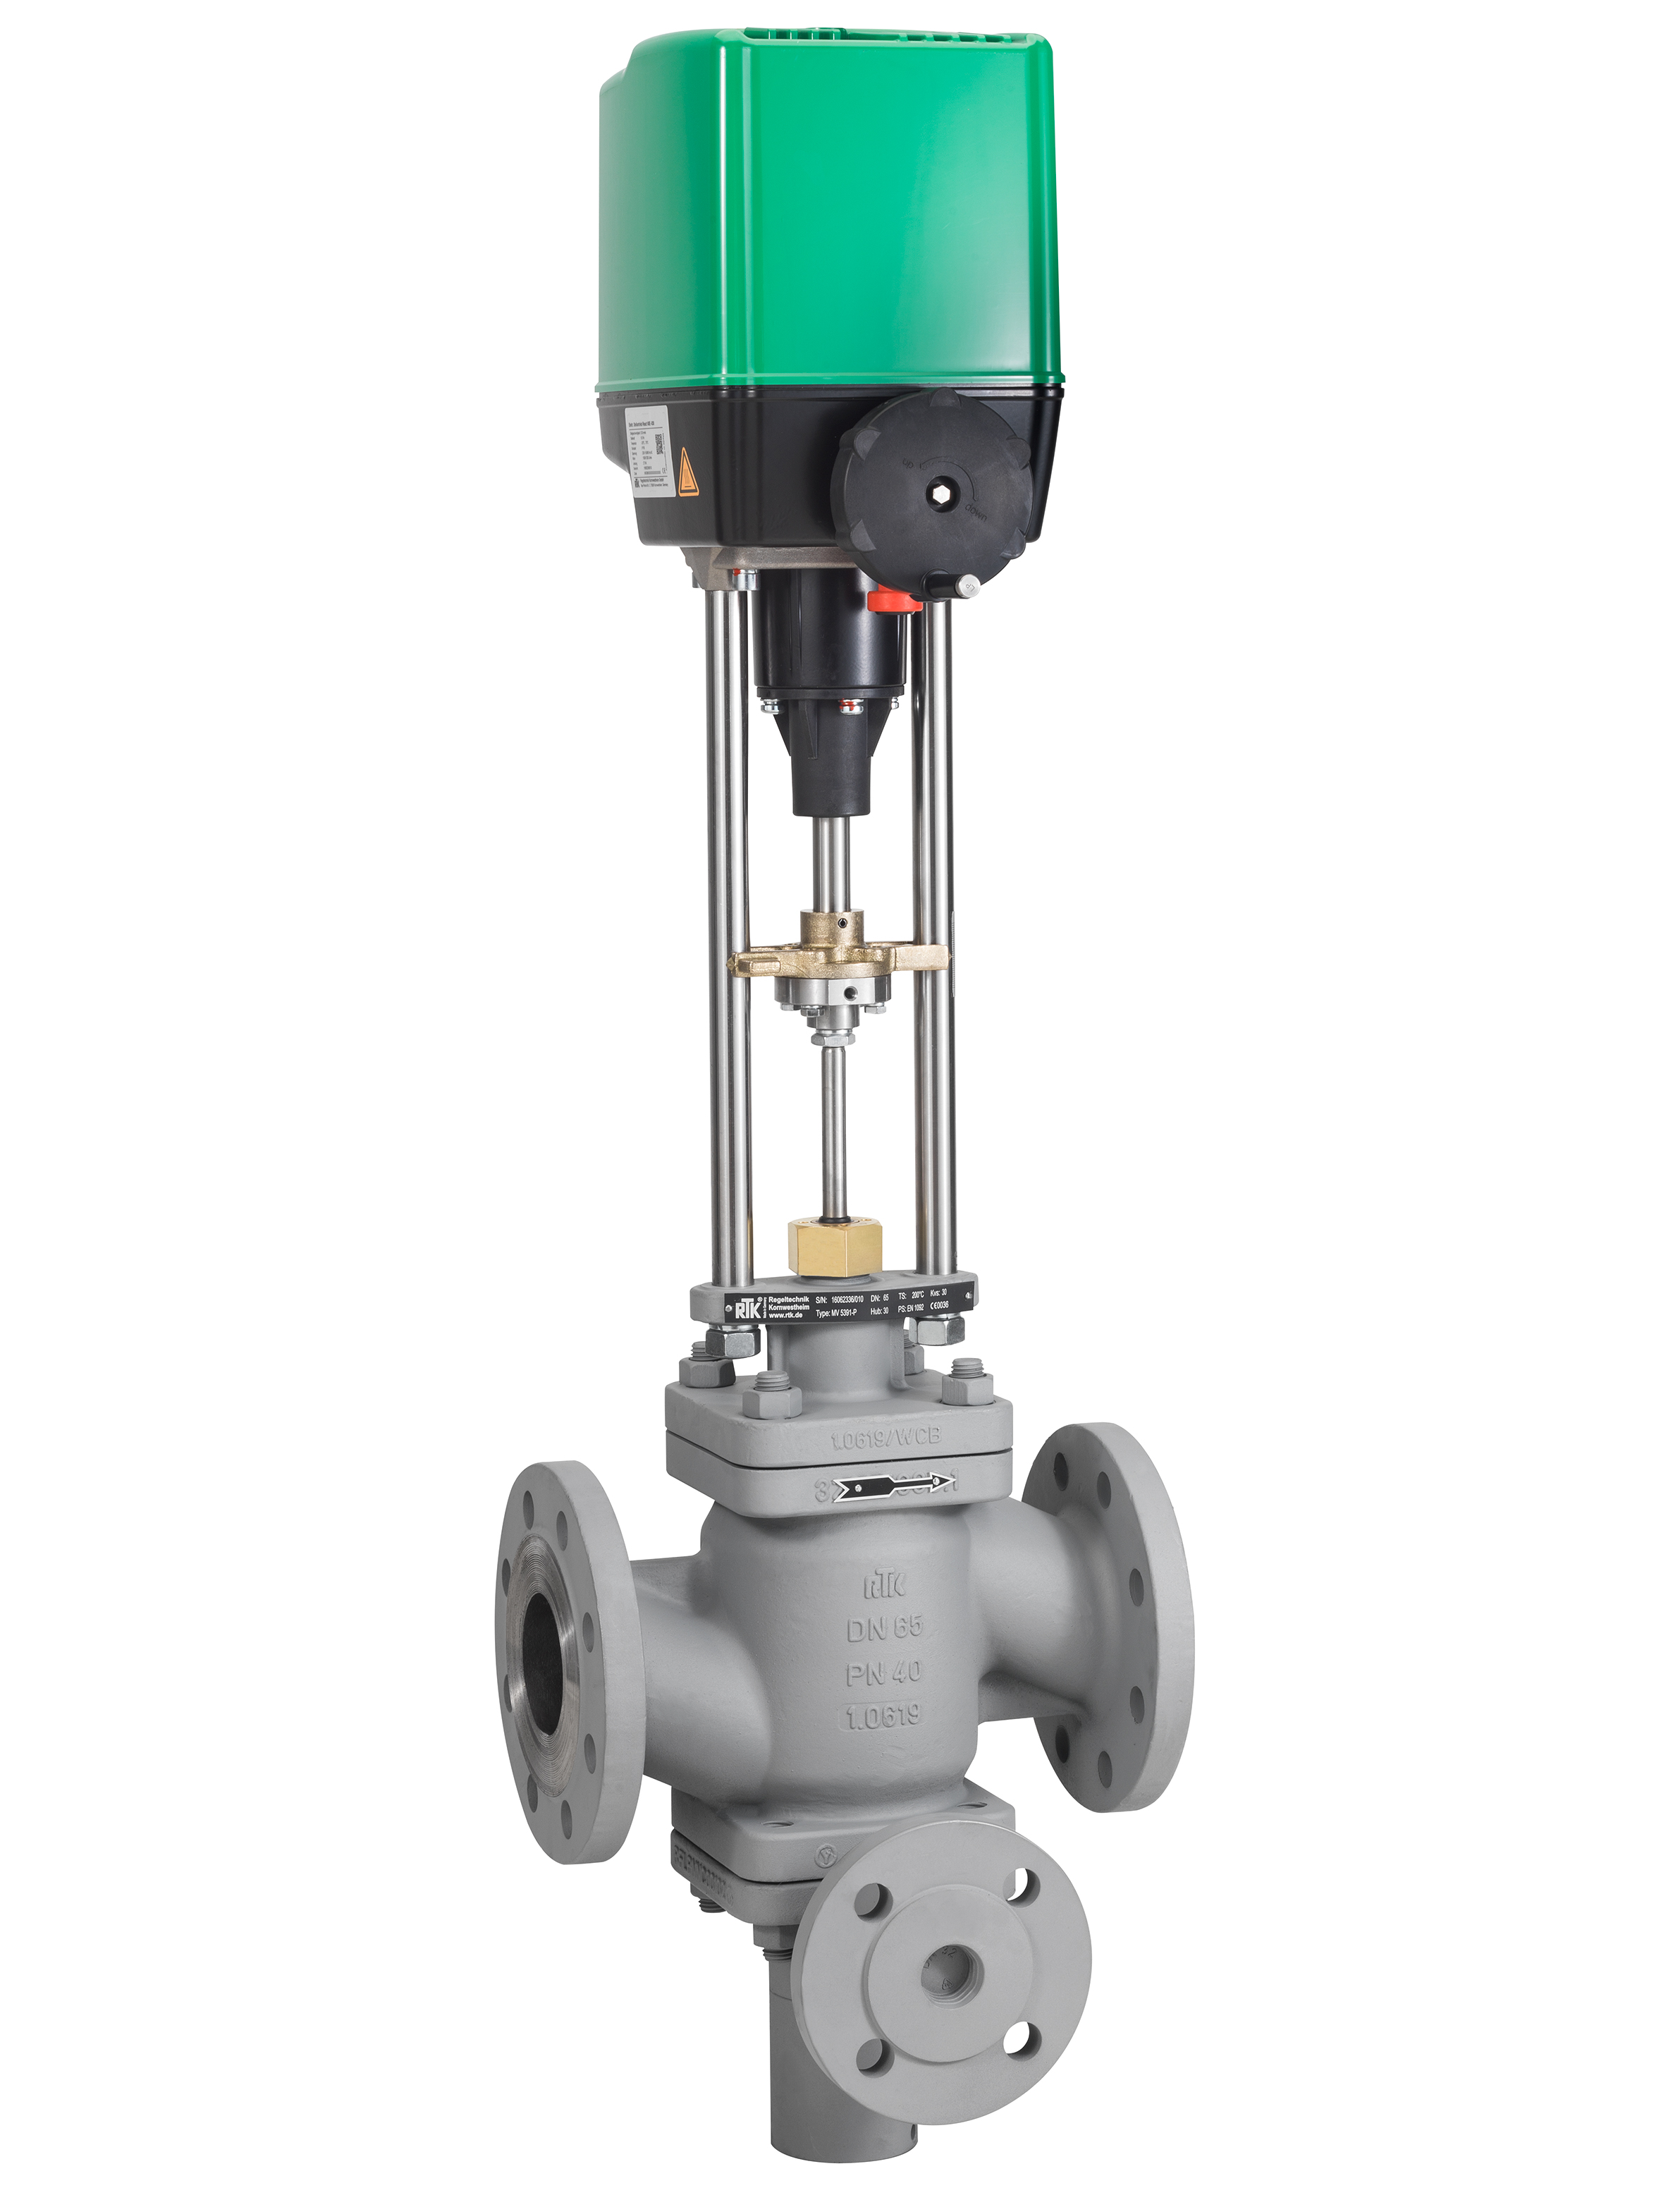 The RTK discharge and pump protection control valve provides the additional flow that is required in a closed loop.